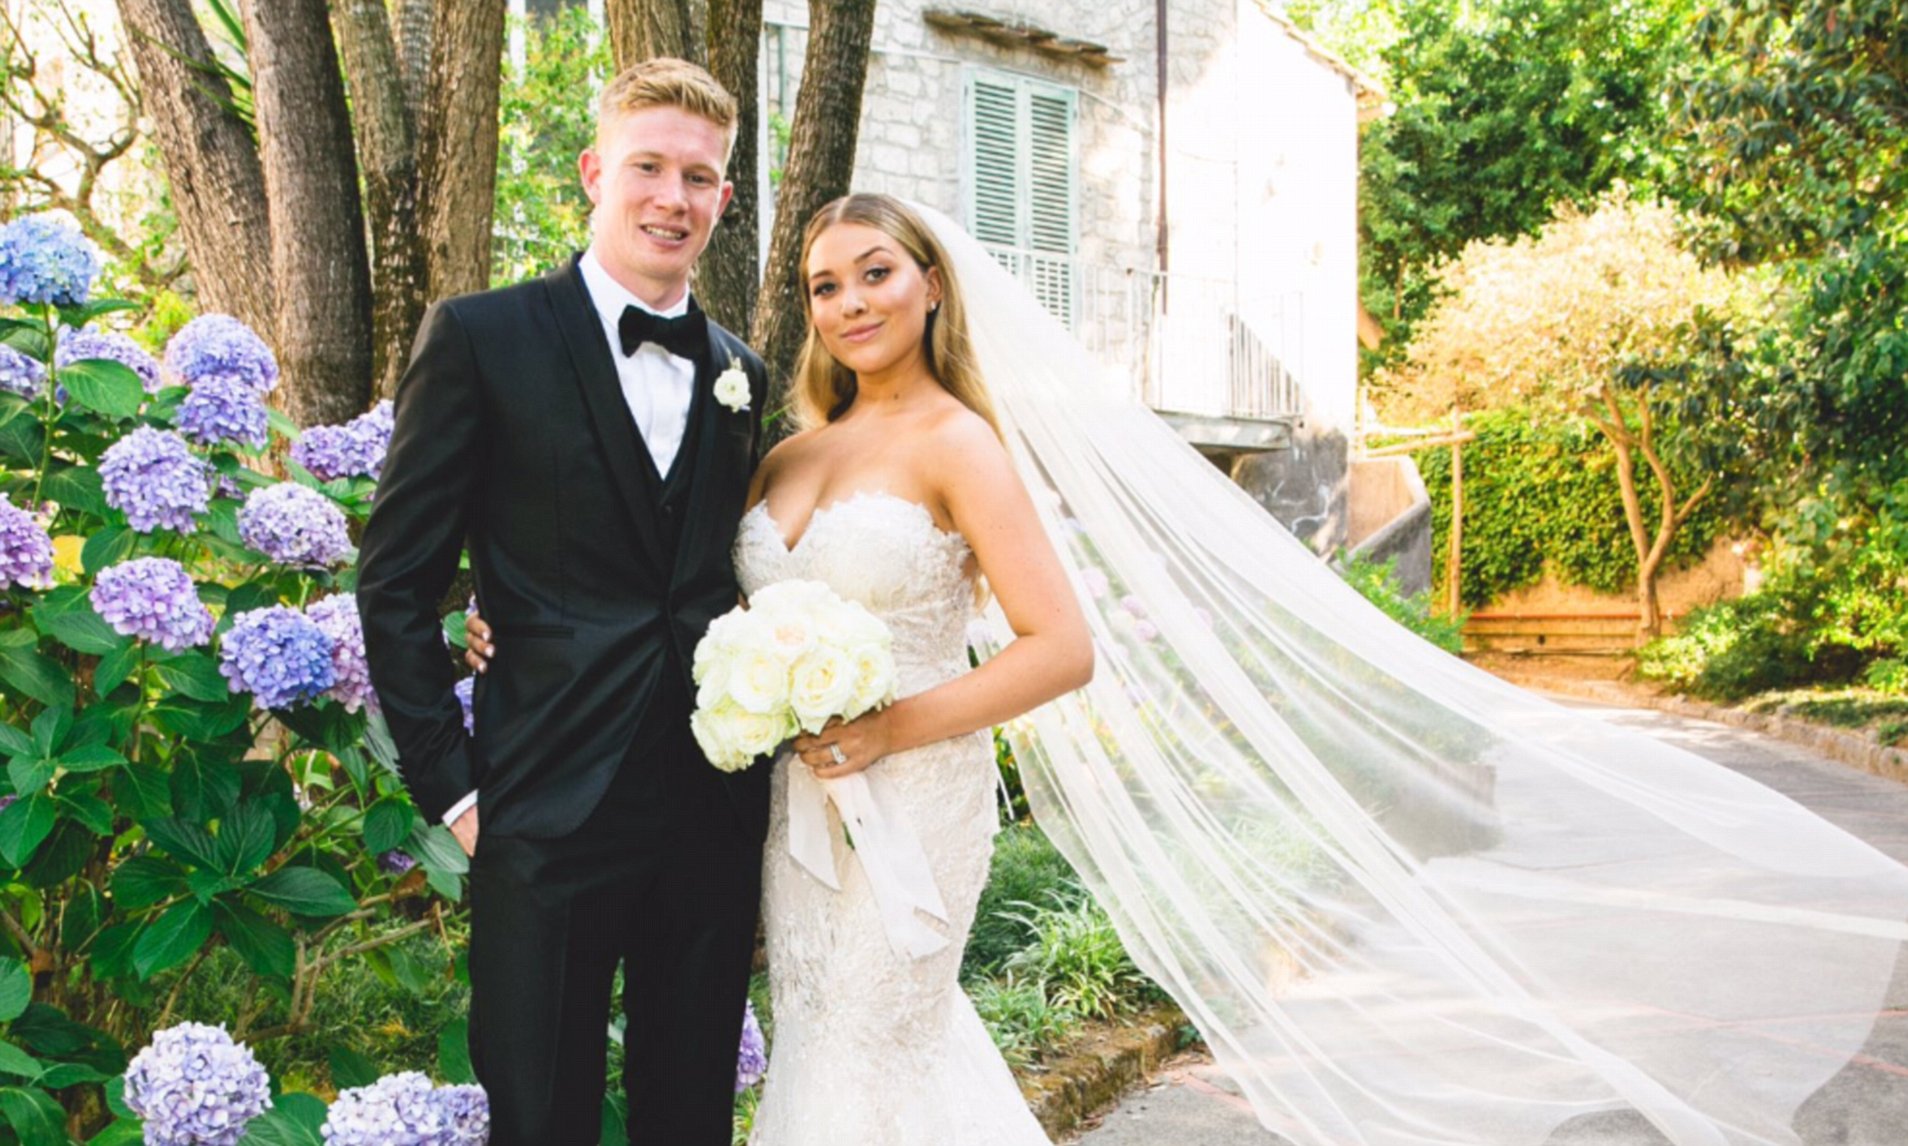 Kevin De Bruyne marries girlfriend Michele Lacroix | Daily Mail Online